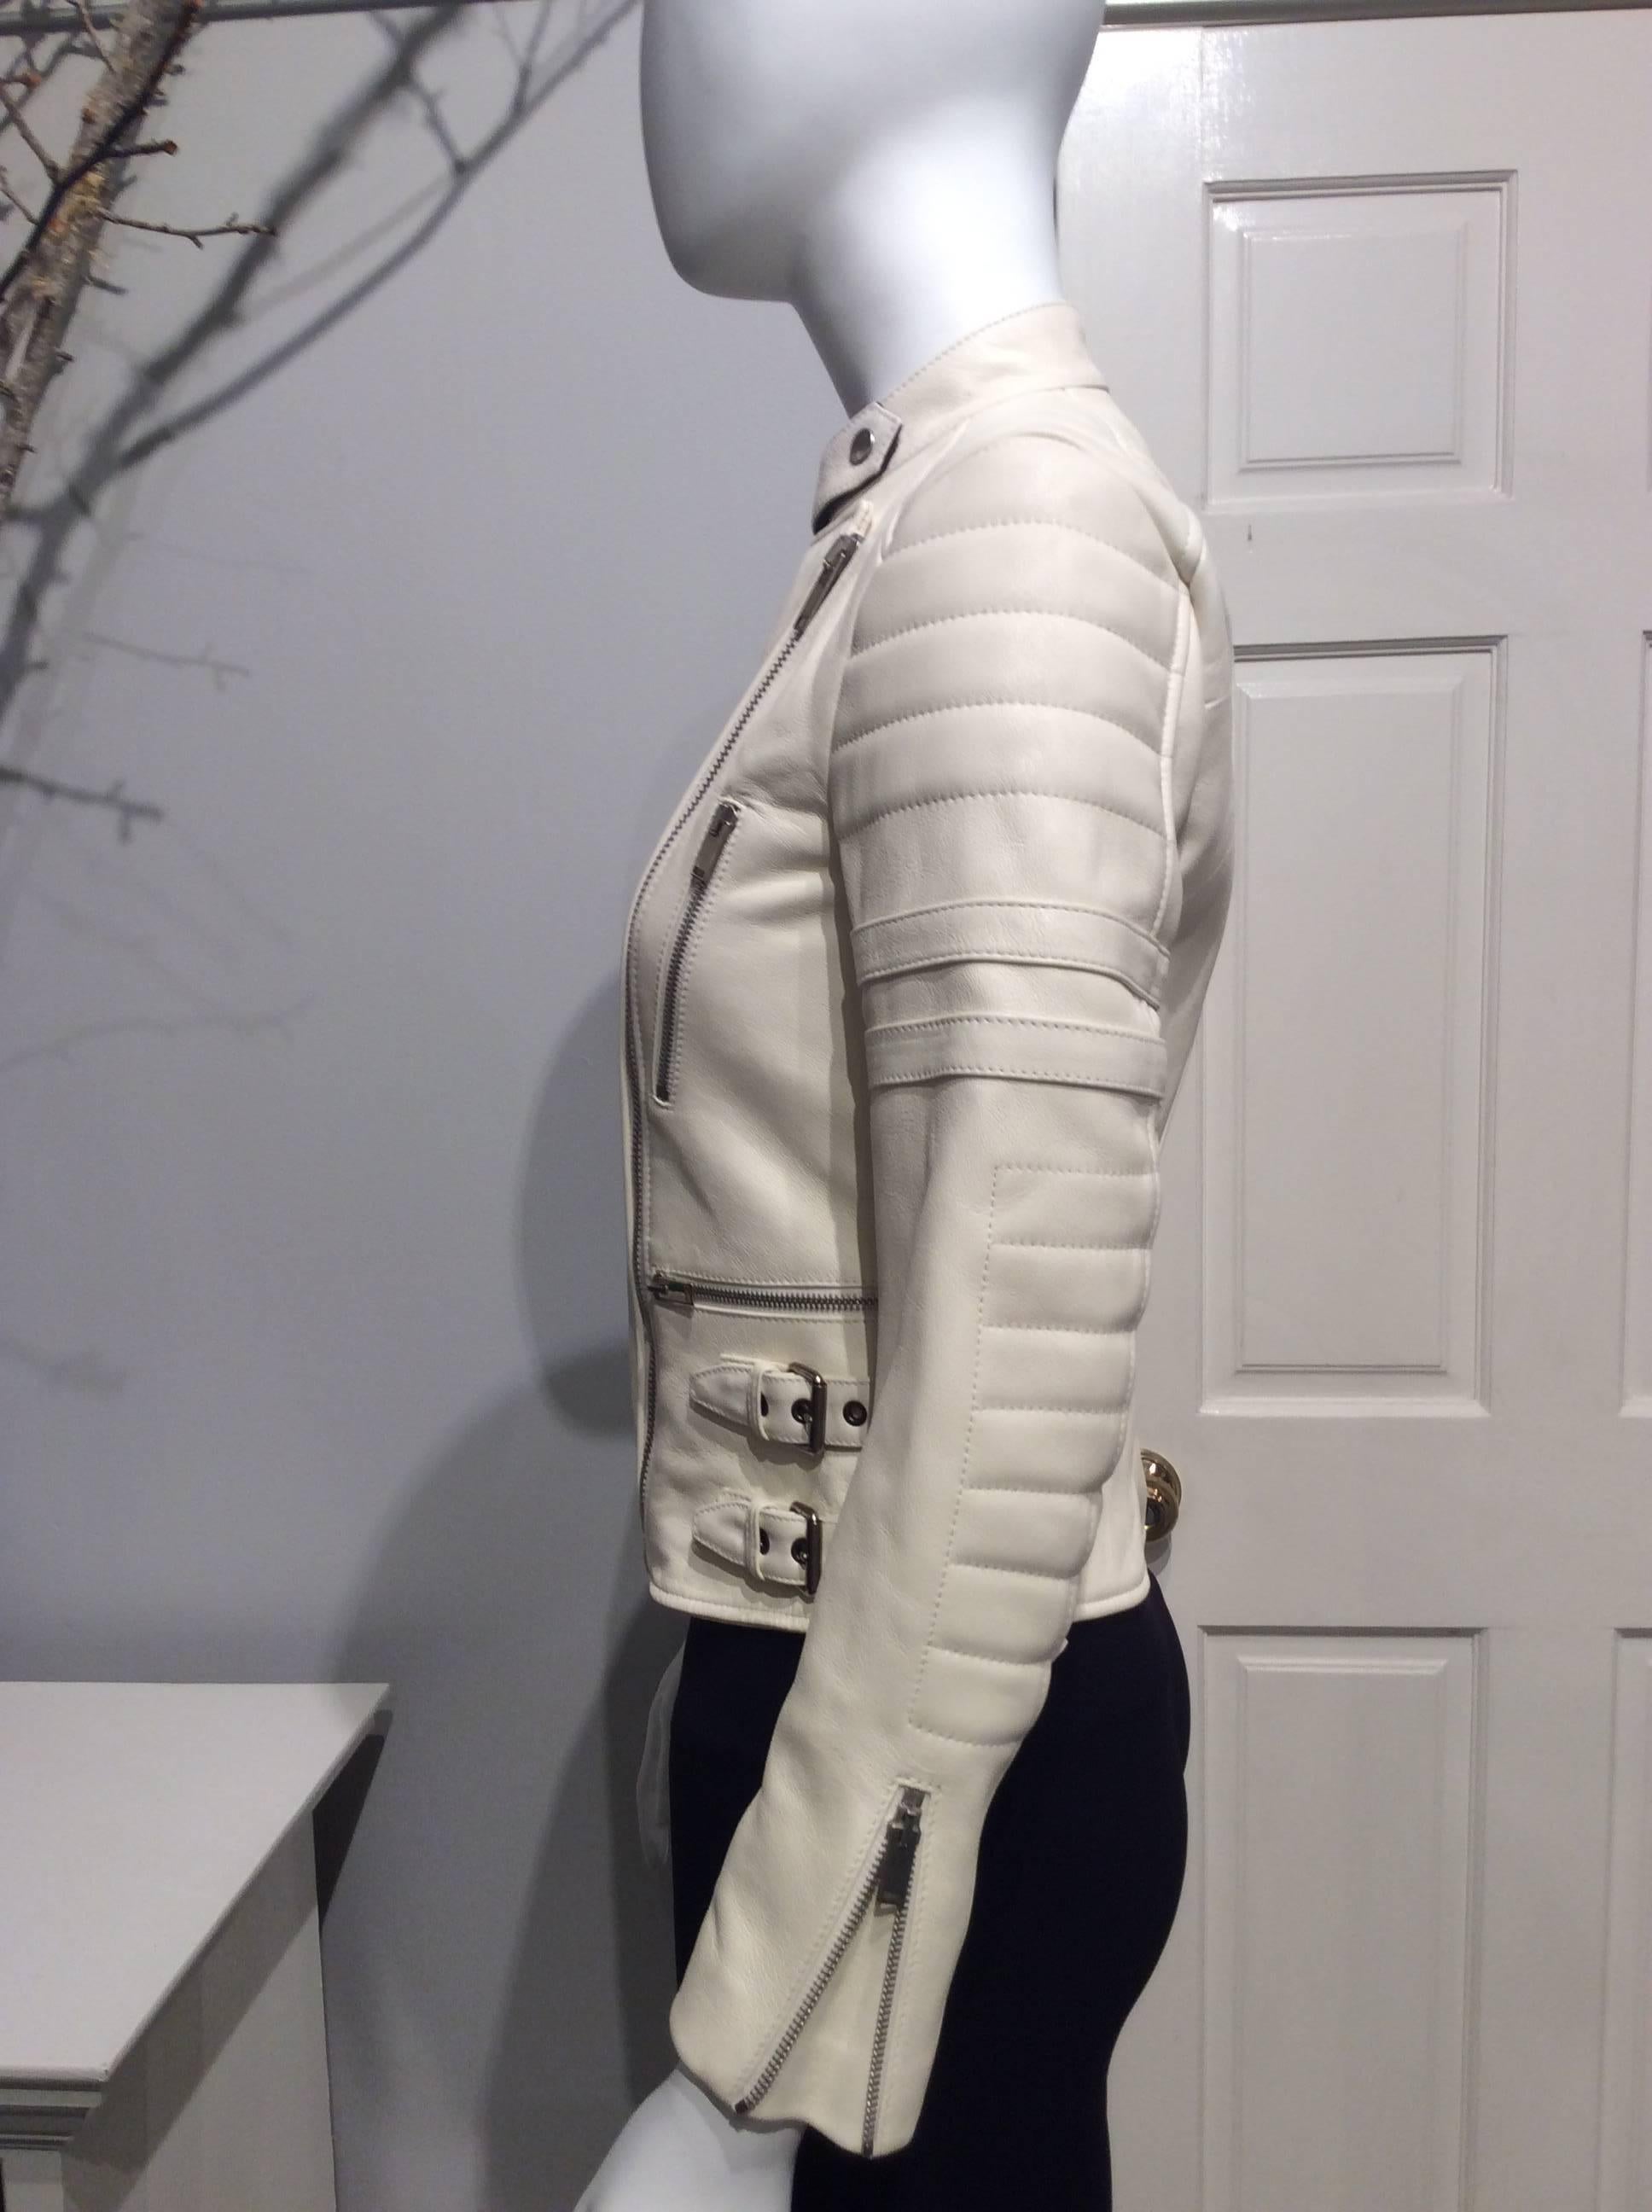 Striking Céline motorcycle jacket from the 2014 collection designed by Phoebe Philo. 
This soft white lambs leather jacket has as a contrast a wonderful vibrant red lining. To protect from wear the collar is lined in black baby corduroy. 
The